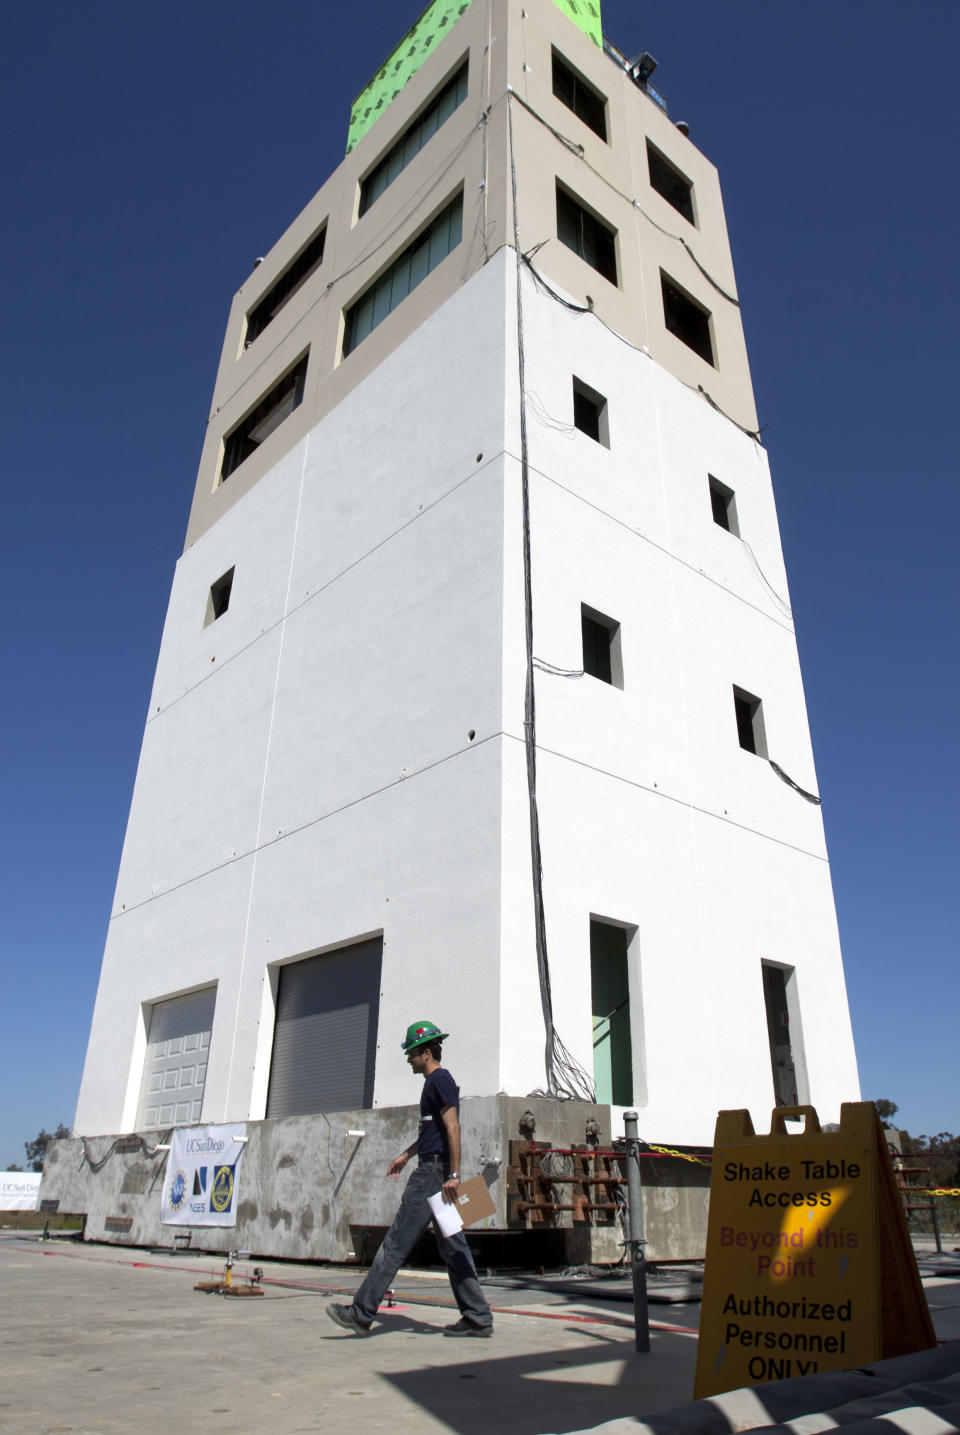 A researcher walks in front of a five-story building constructed to study earthquakes at a facility run by the University of California at San Diego Tuesday, April 17, 2012, in San Diego. To study the affects of earthquakes, researchers will repeatedly shake a building over a span of two weeks as part of the $5 million experiment funded by government agencies, foundations and others. (AP Photo/Gregory Bull)